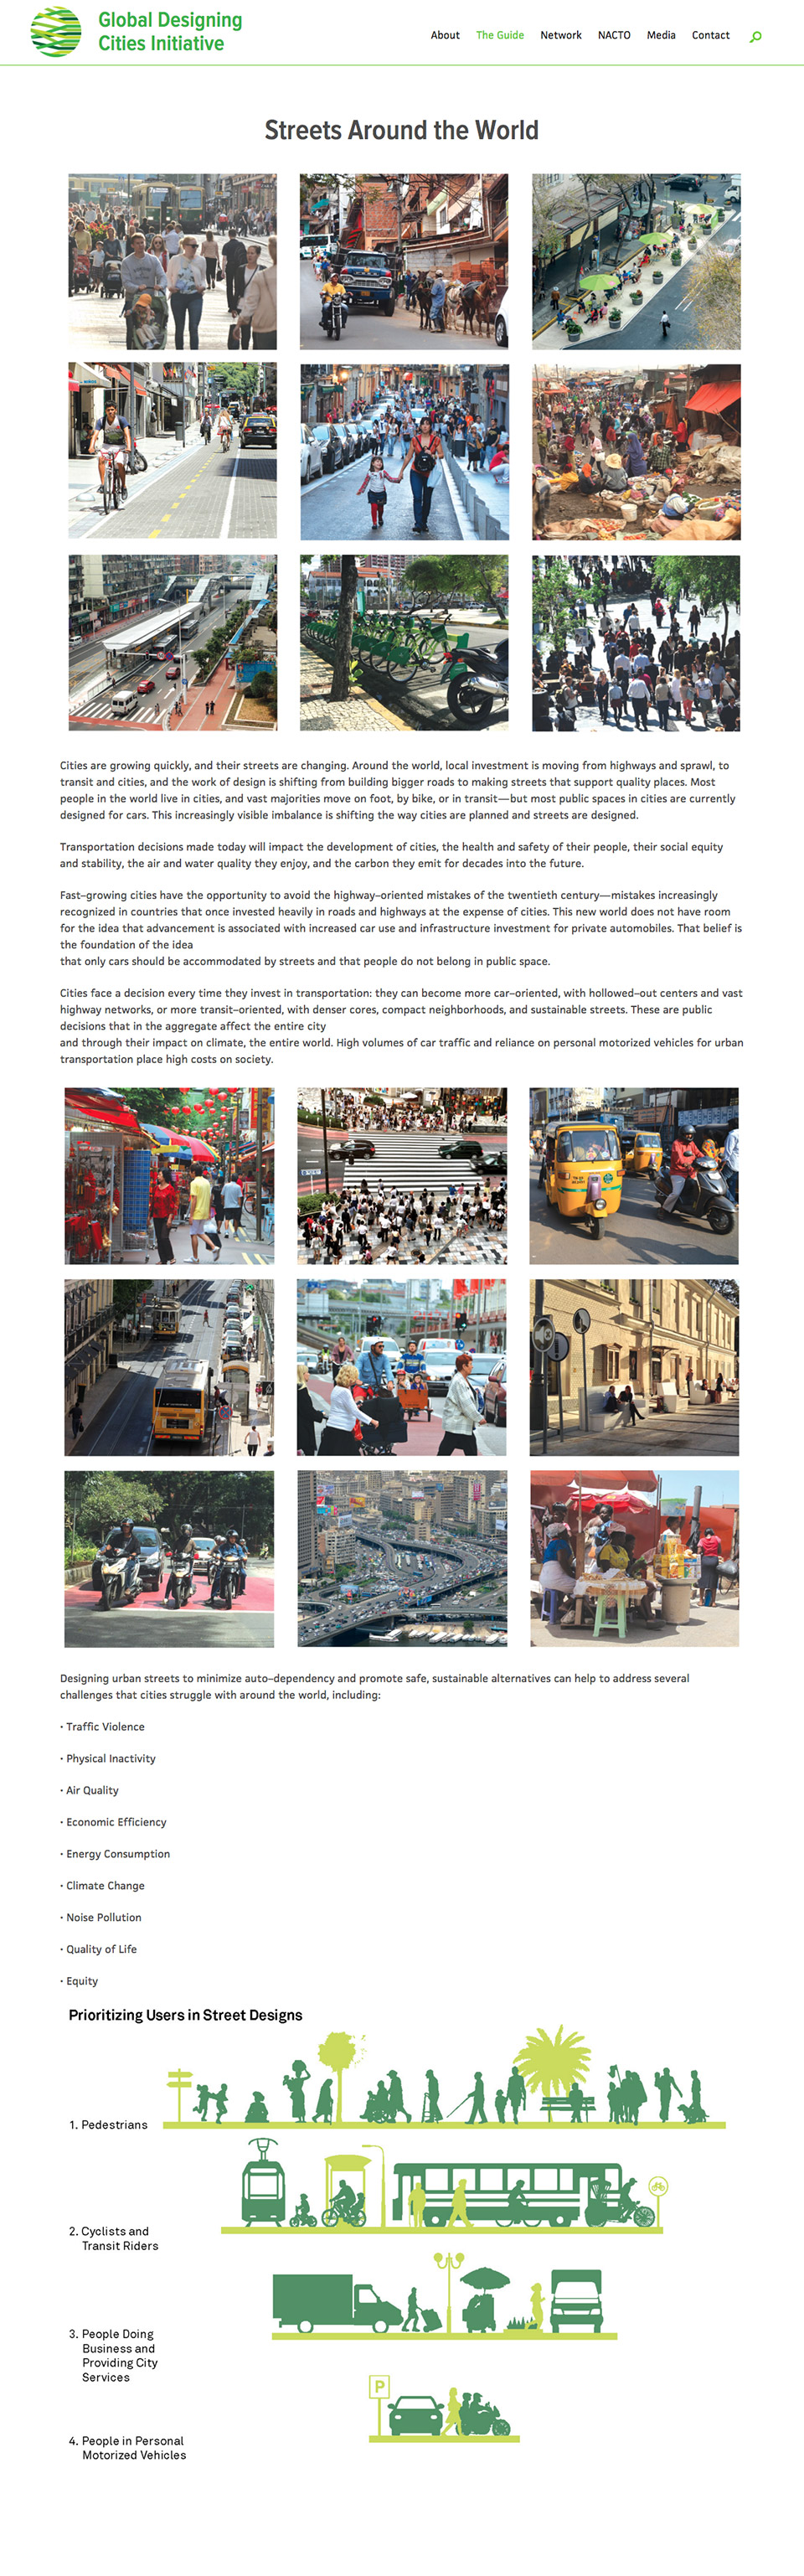 Global Designing Cities Initiative: Featured Guide Page